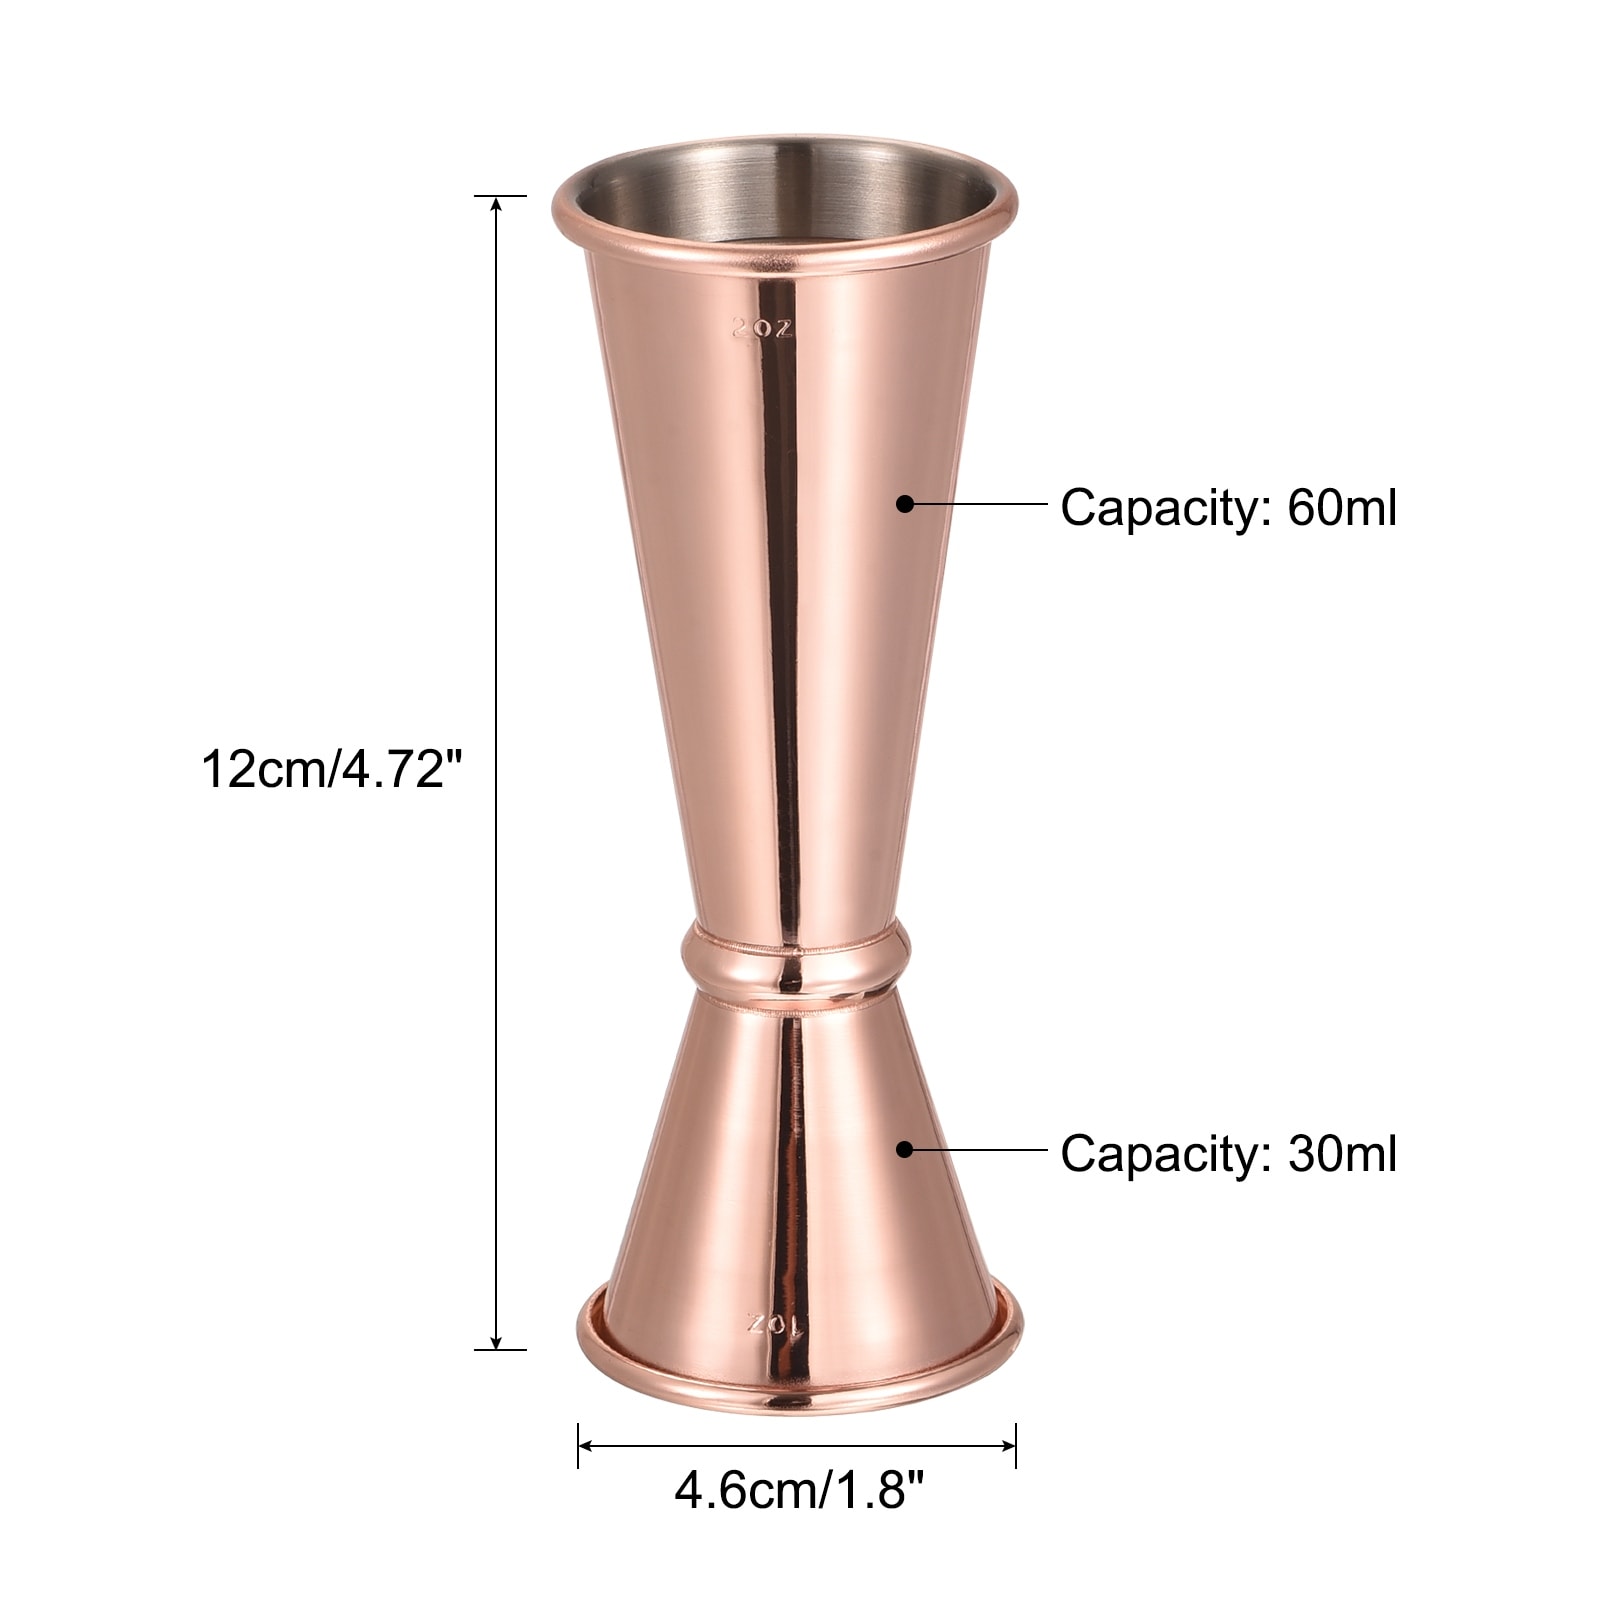 https://ak1.ostkcdn.com/images/products/is/images/direct/a84c09643342570d8f51bcff22db46a4ee8a9a25/1oz-2oz-Stainless-Steel-Cocktail-Jigger-Shot-Glass-Measuring-Cup.jpg